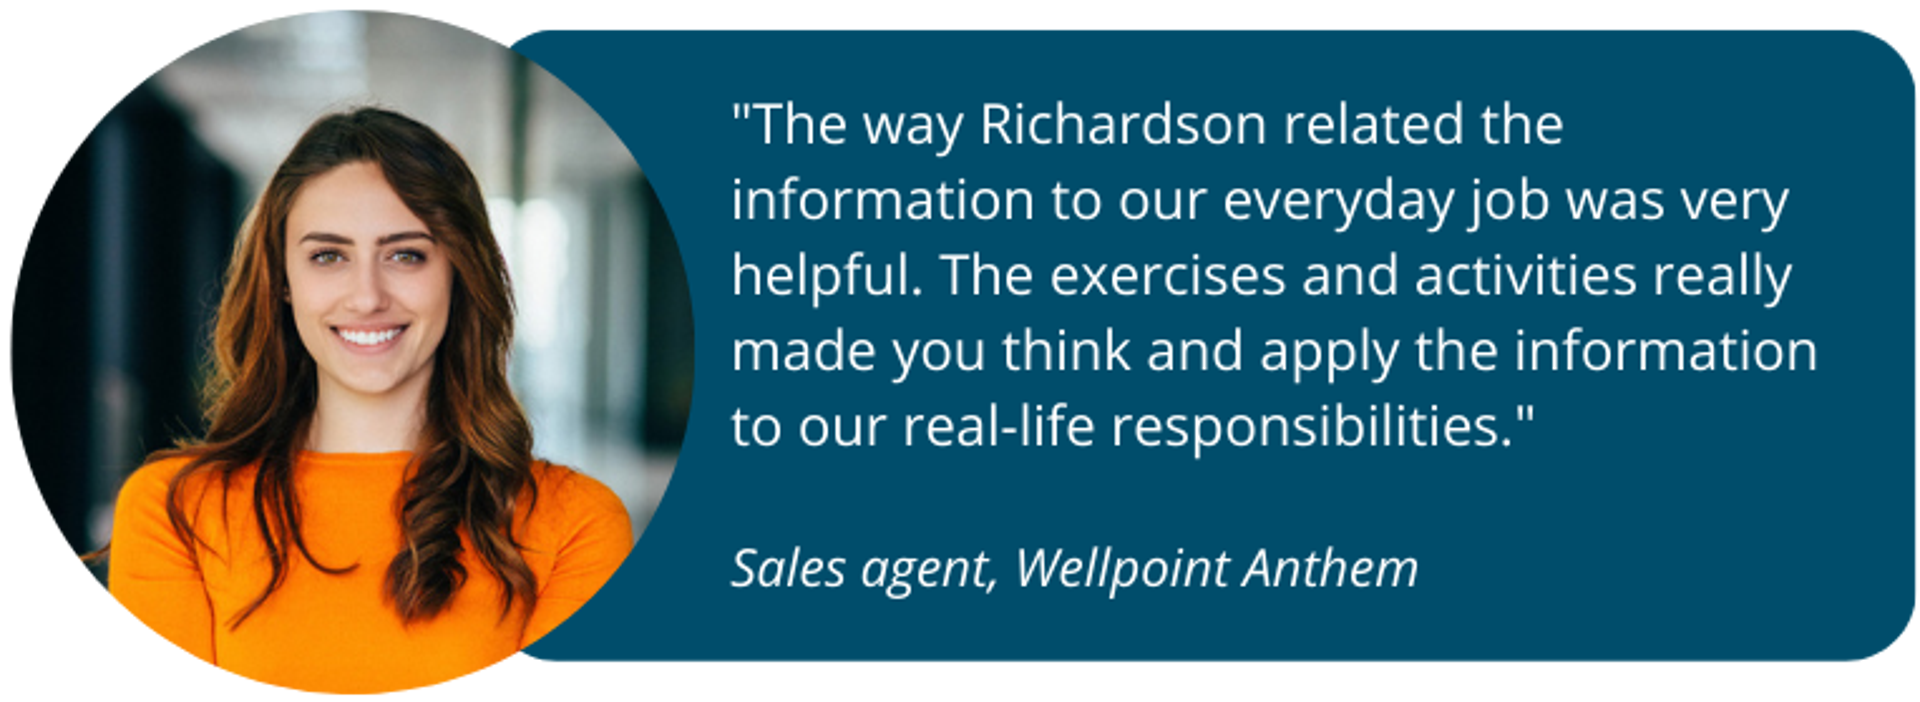 testimonial from sales agent at wellpoint that says 